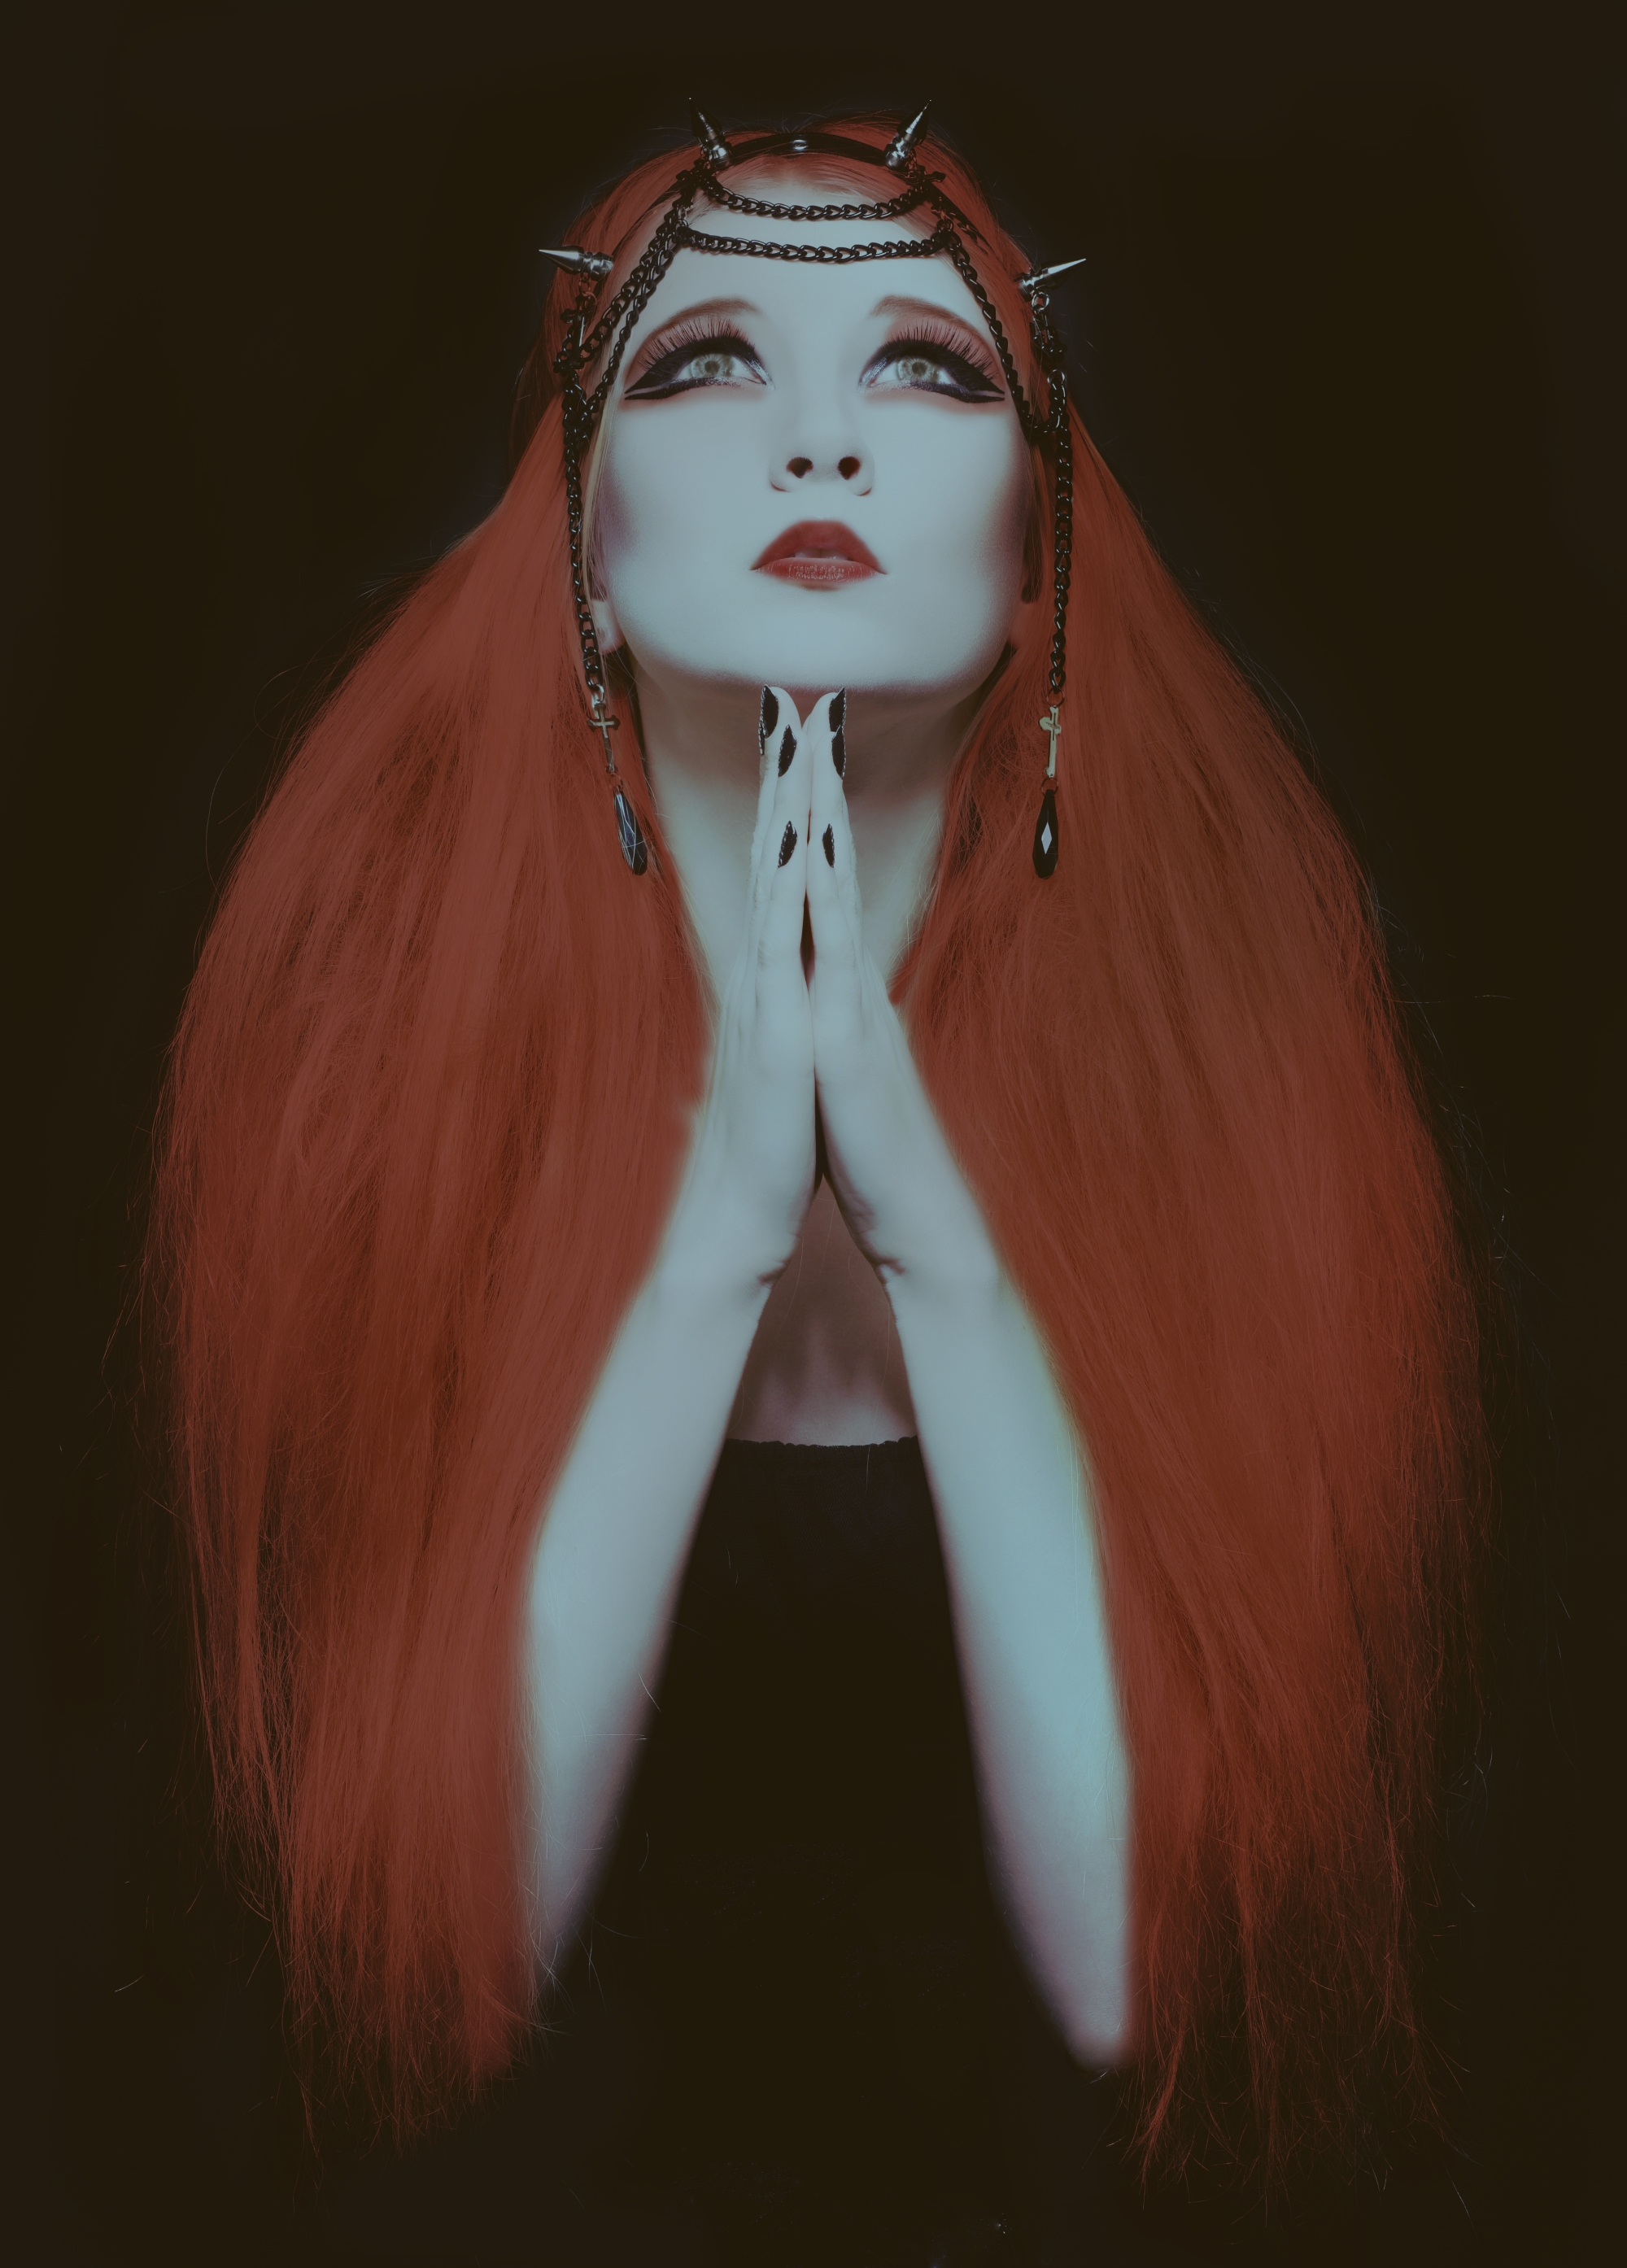 People 2000x2788 women redhead alternative subculture simple background gothic portrait display praying goths looking up black nails painted nails long hair